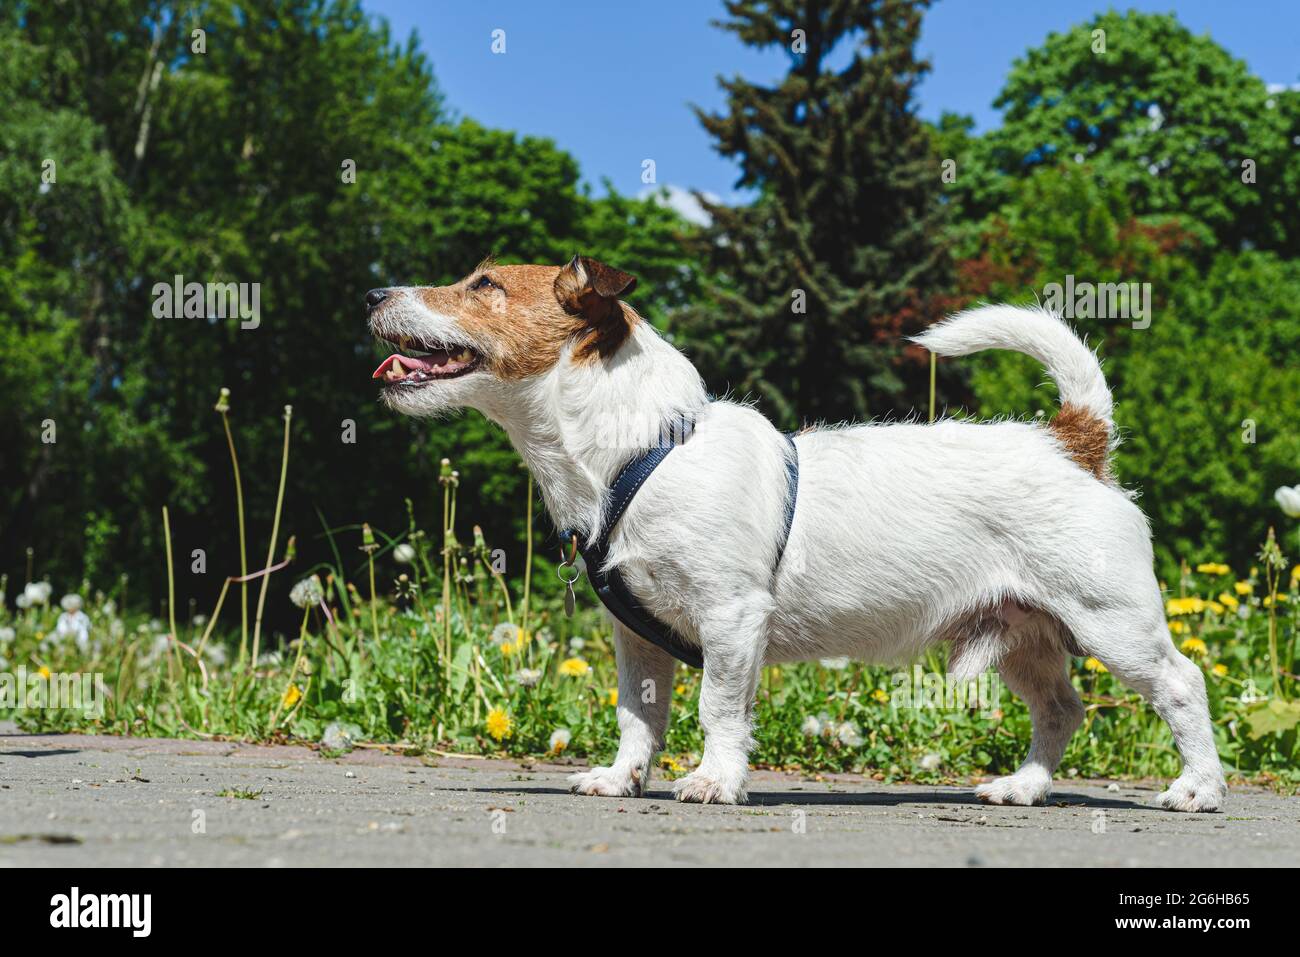 Dog days of summer concept with dog standing outside under bright and hot sun Stock Photo